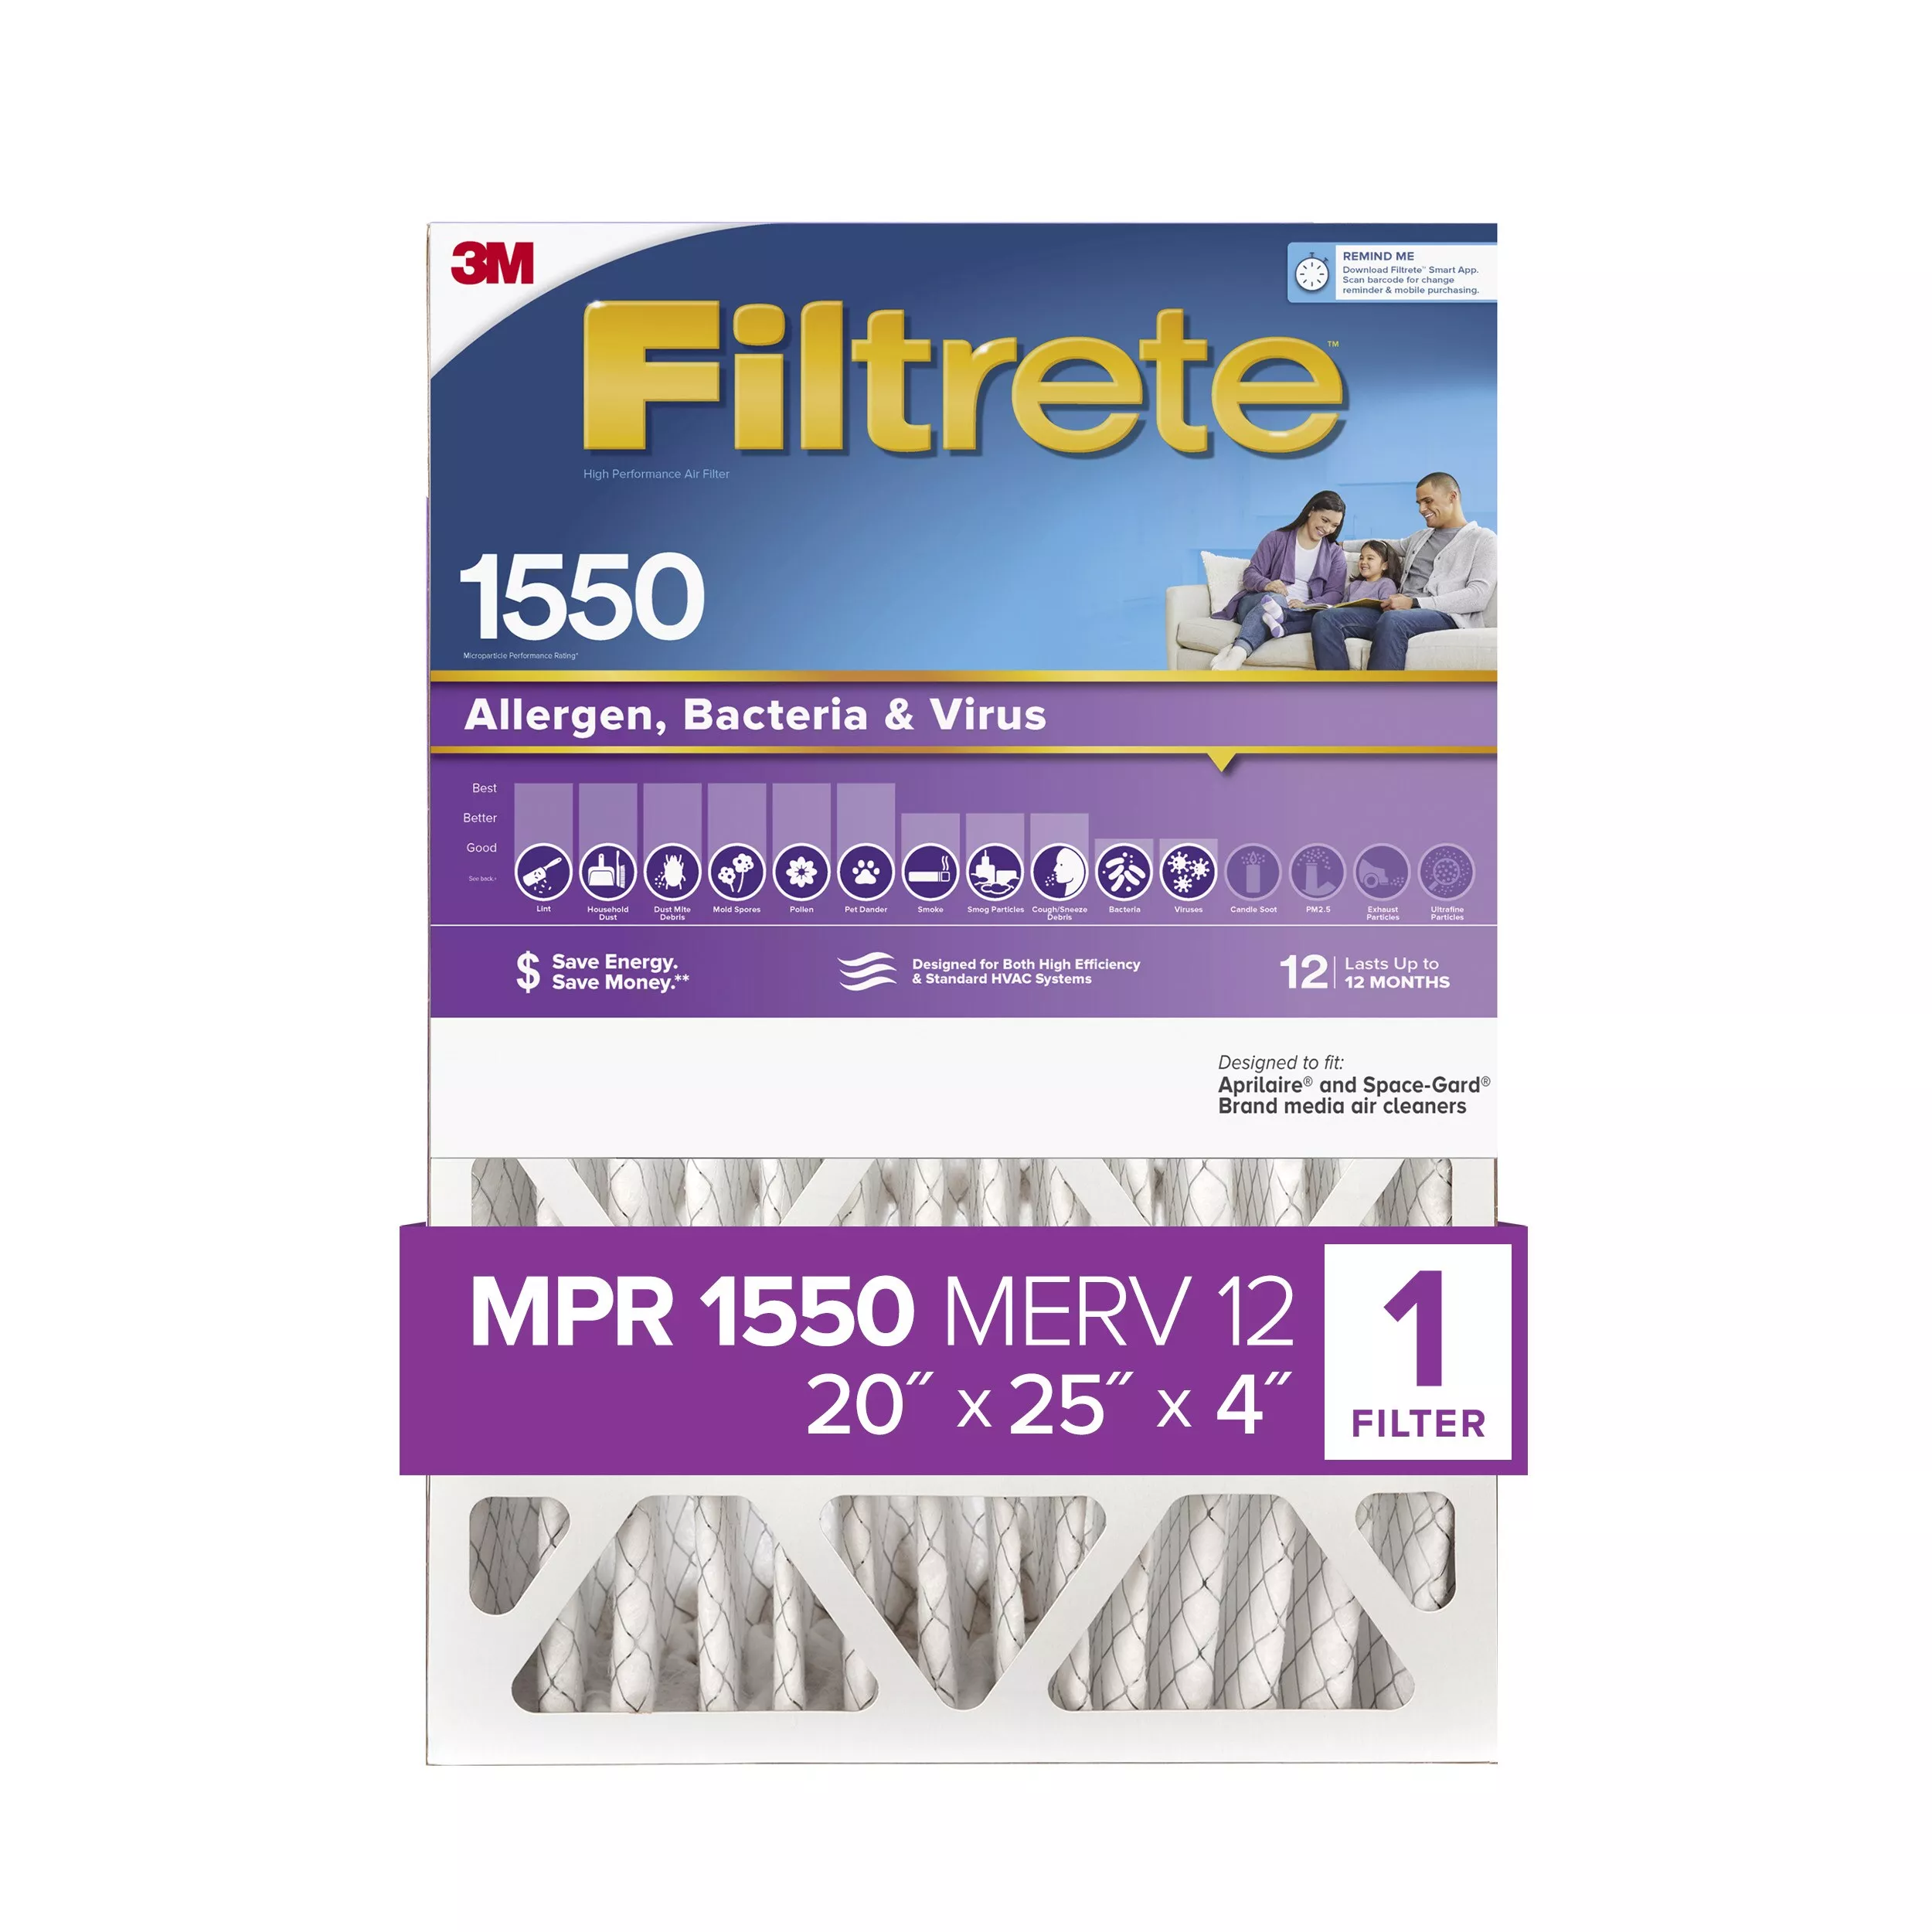 Filtrete™ Allergen Reduction Filters Display DP03-HDW-DC5, 5
Filters/Tray